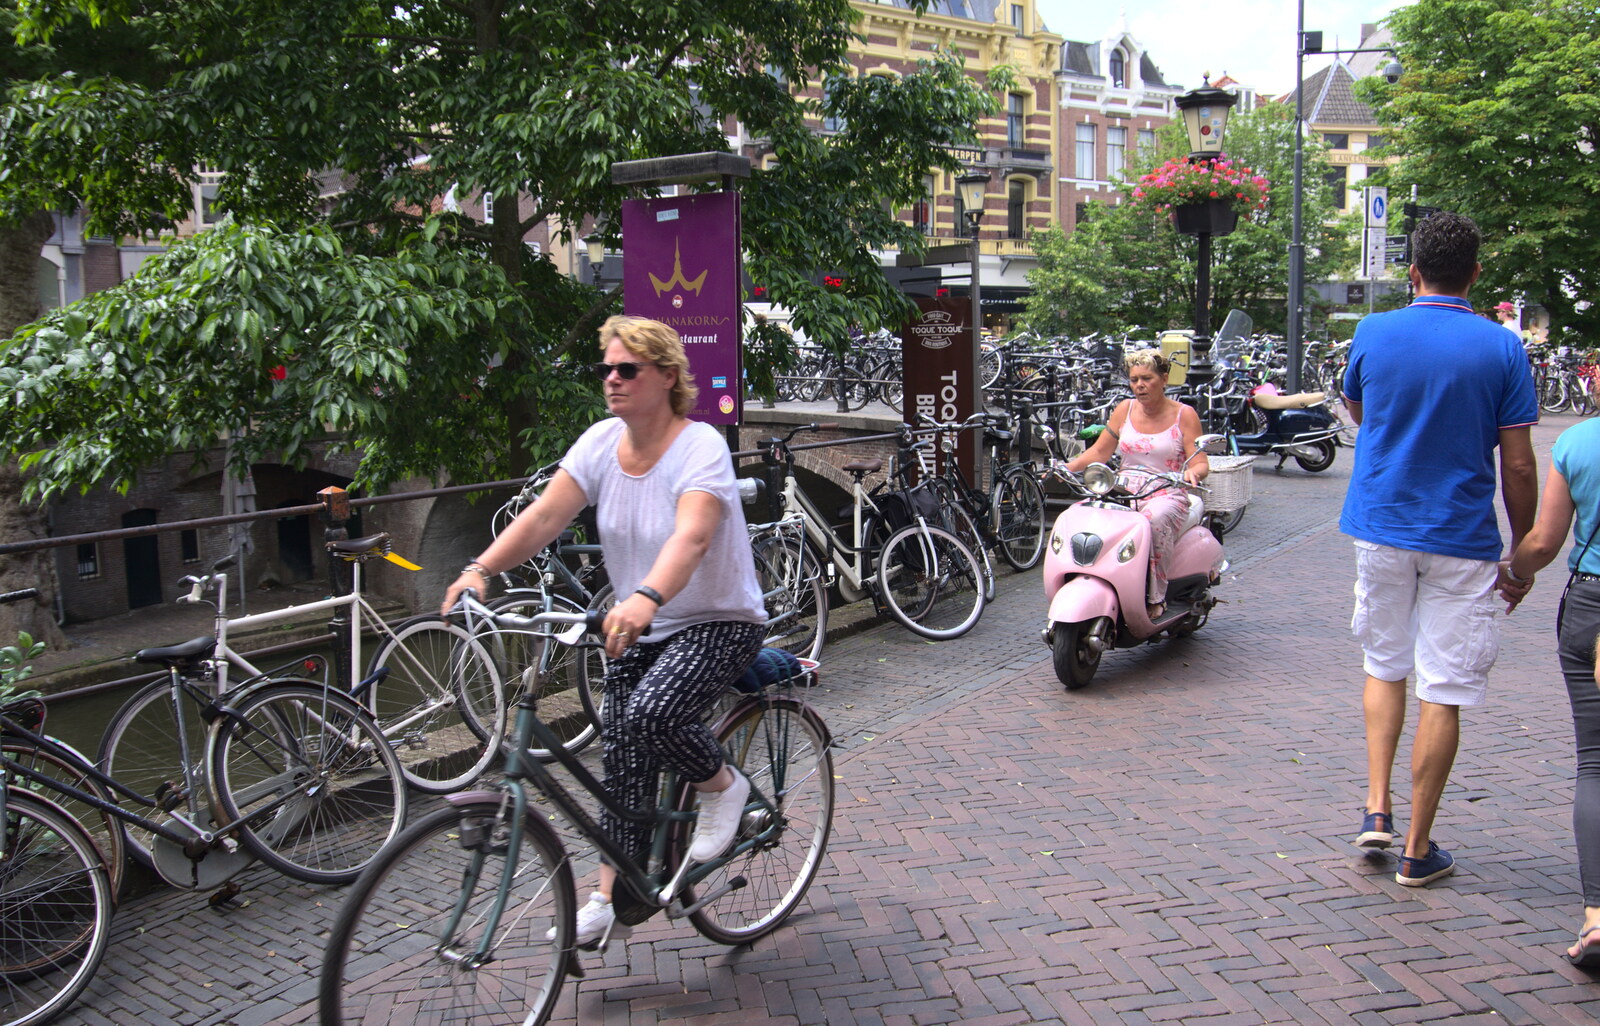 Cycles and mopeds by the Oudegracht from A Postcard from Utrecht, Nederlands - 10th June 2018